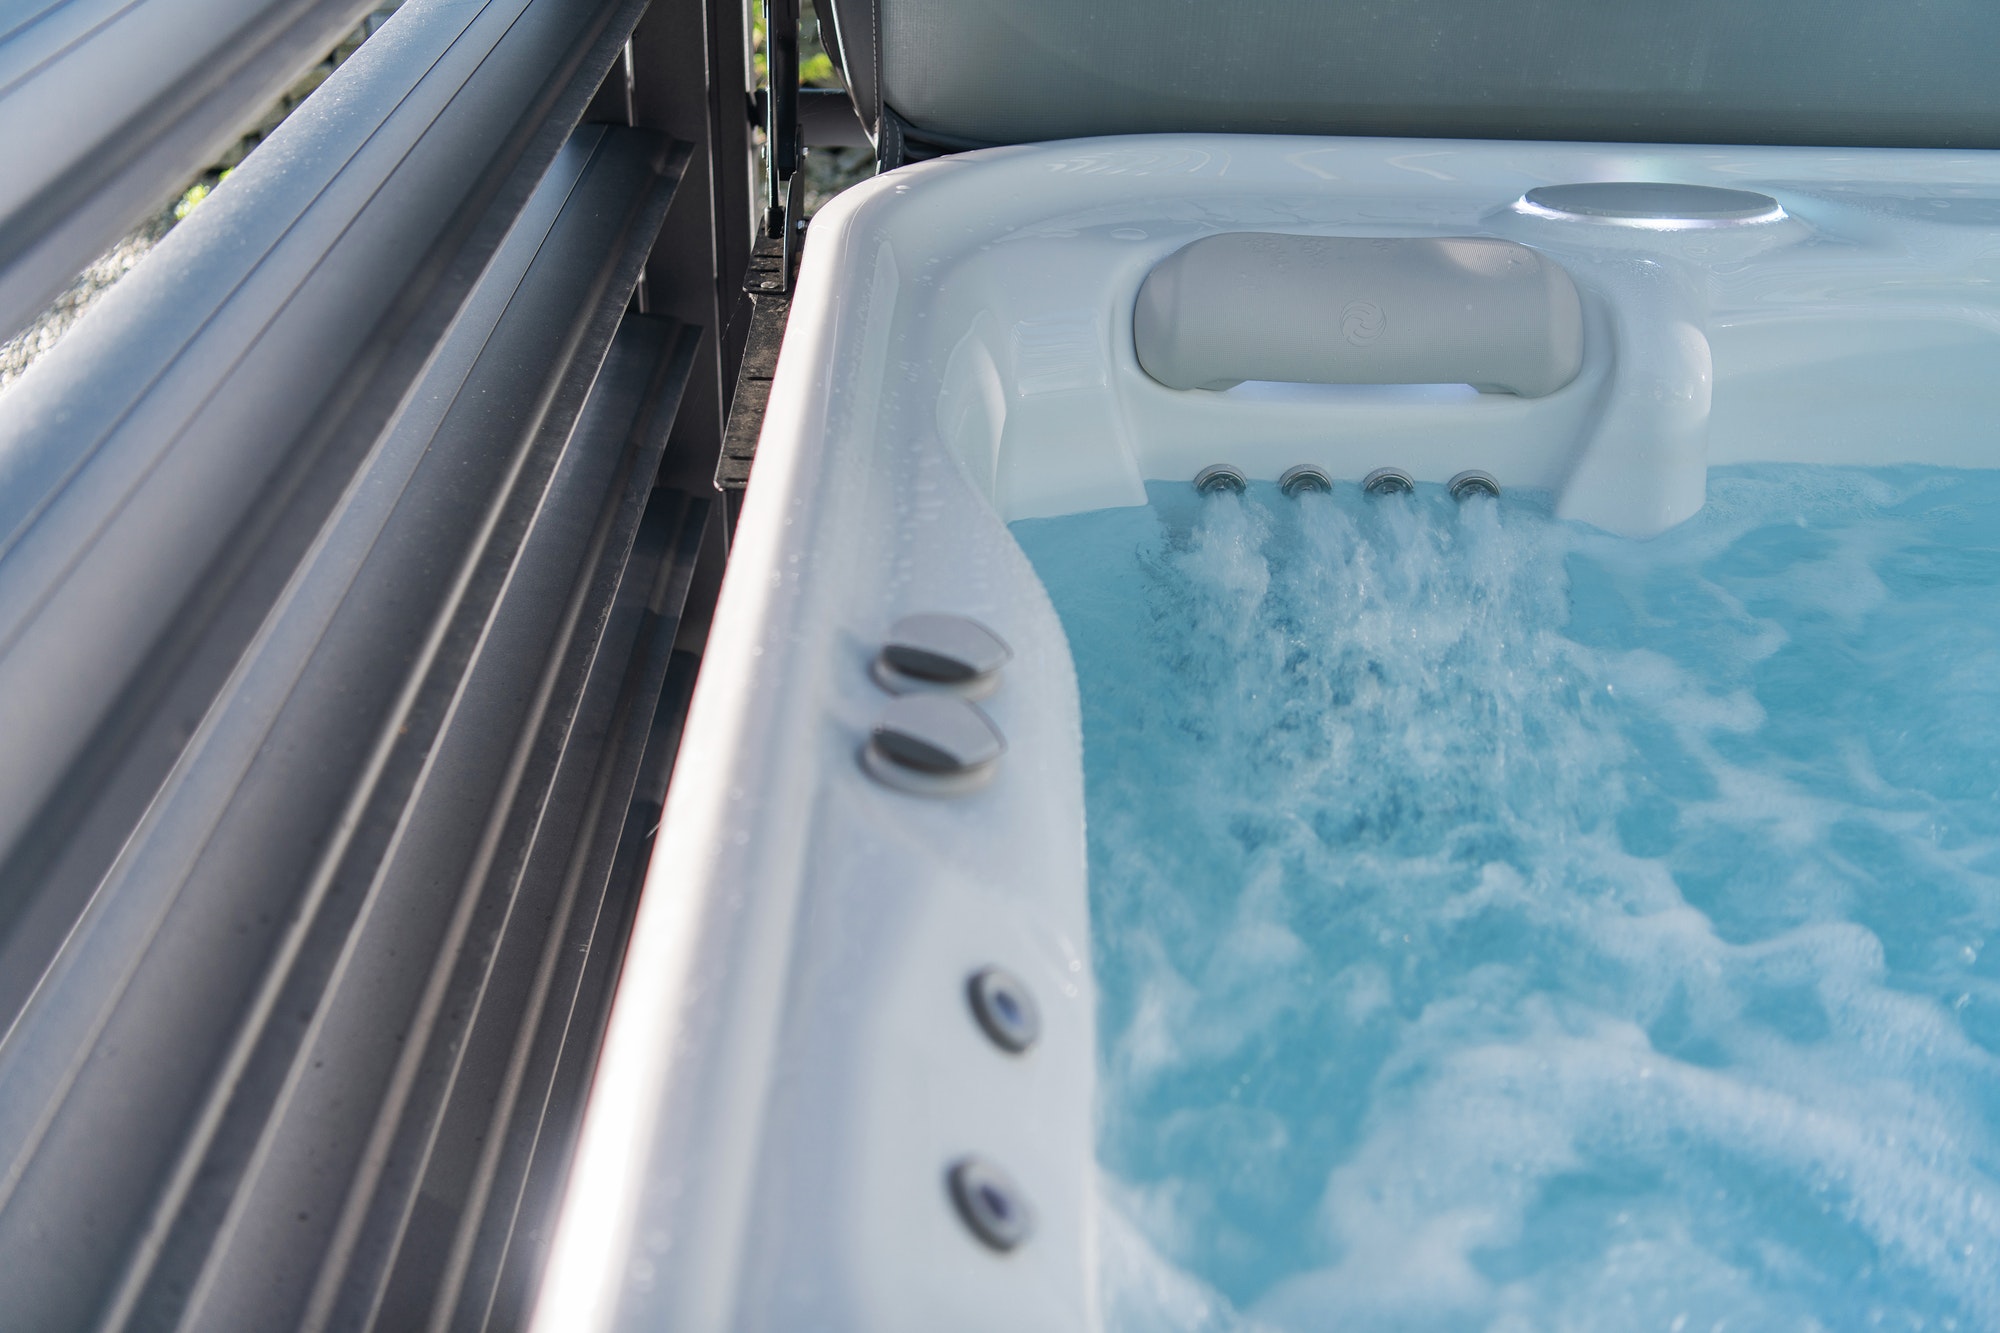 How To Fix A Leaking Hot Tub Jet | Storables